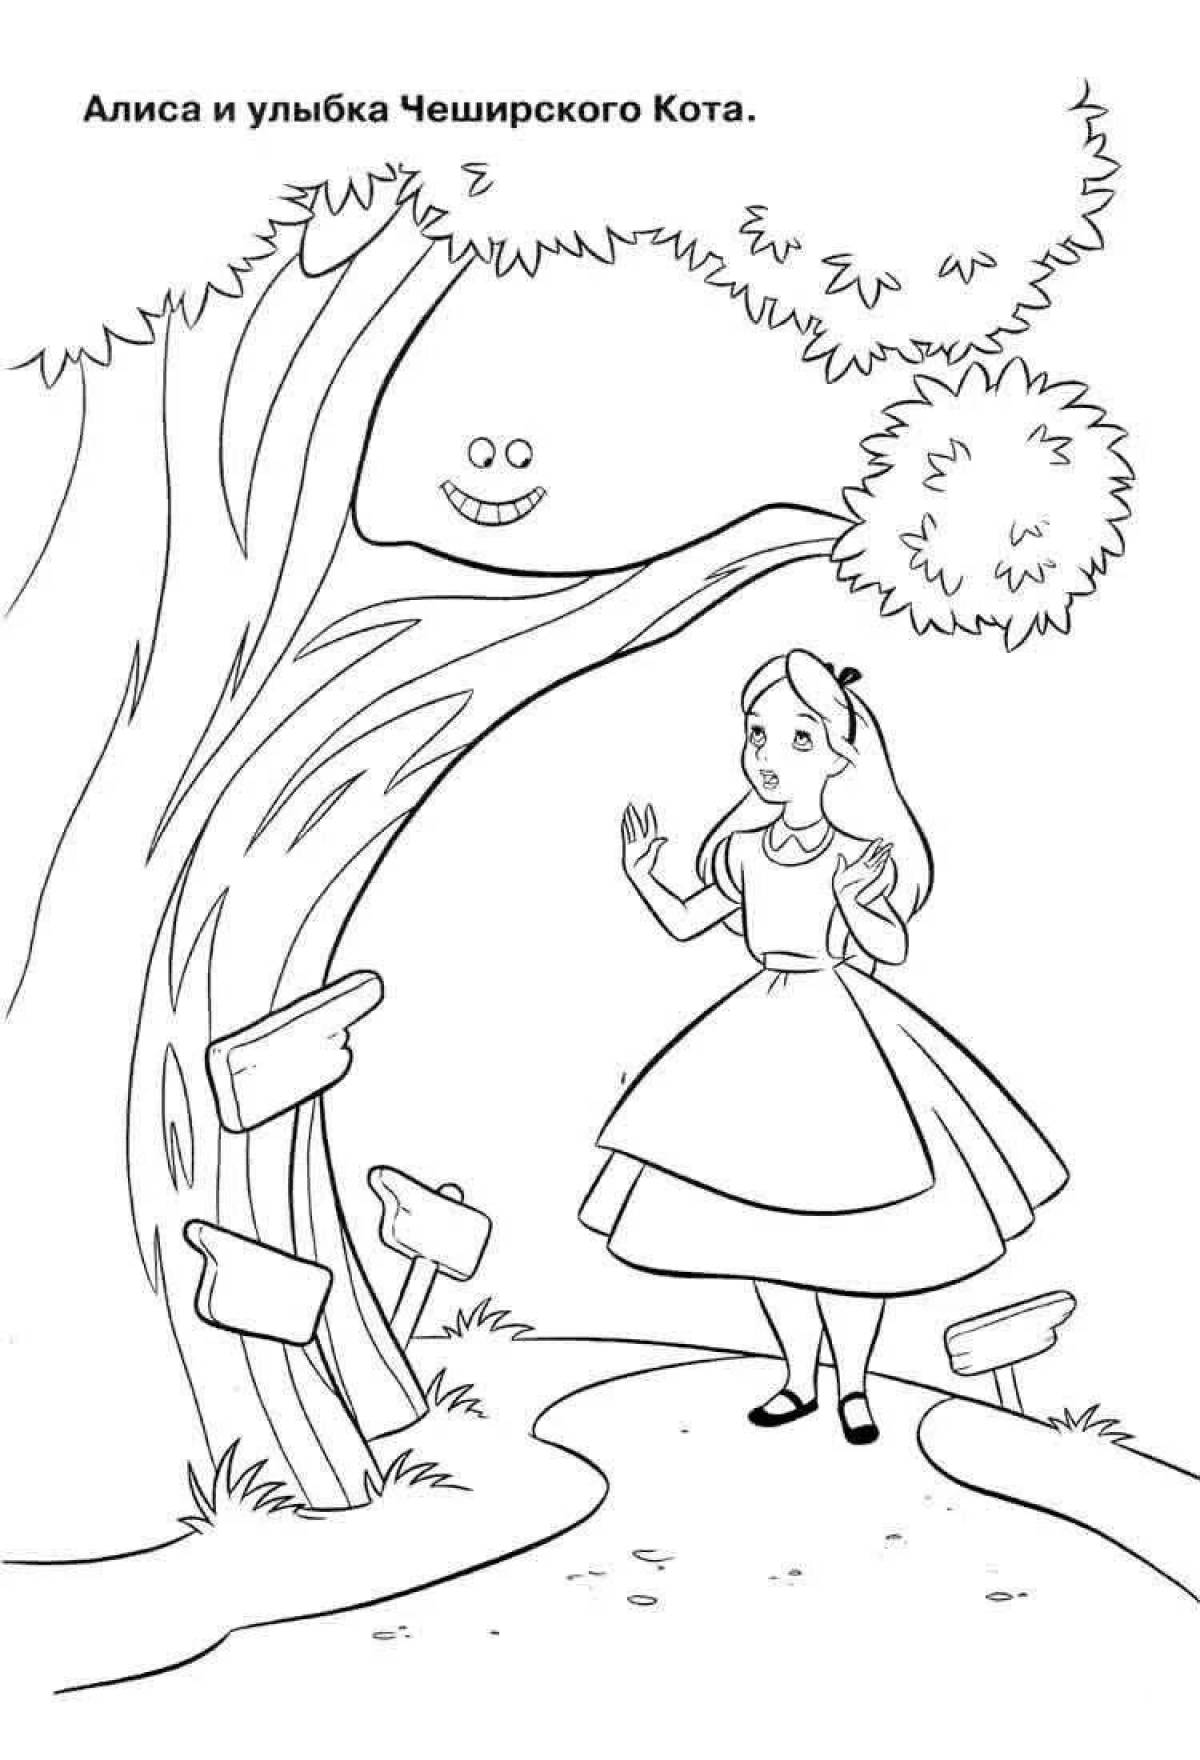 Inviting coloring pages of a wonder fairy tale